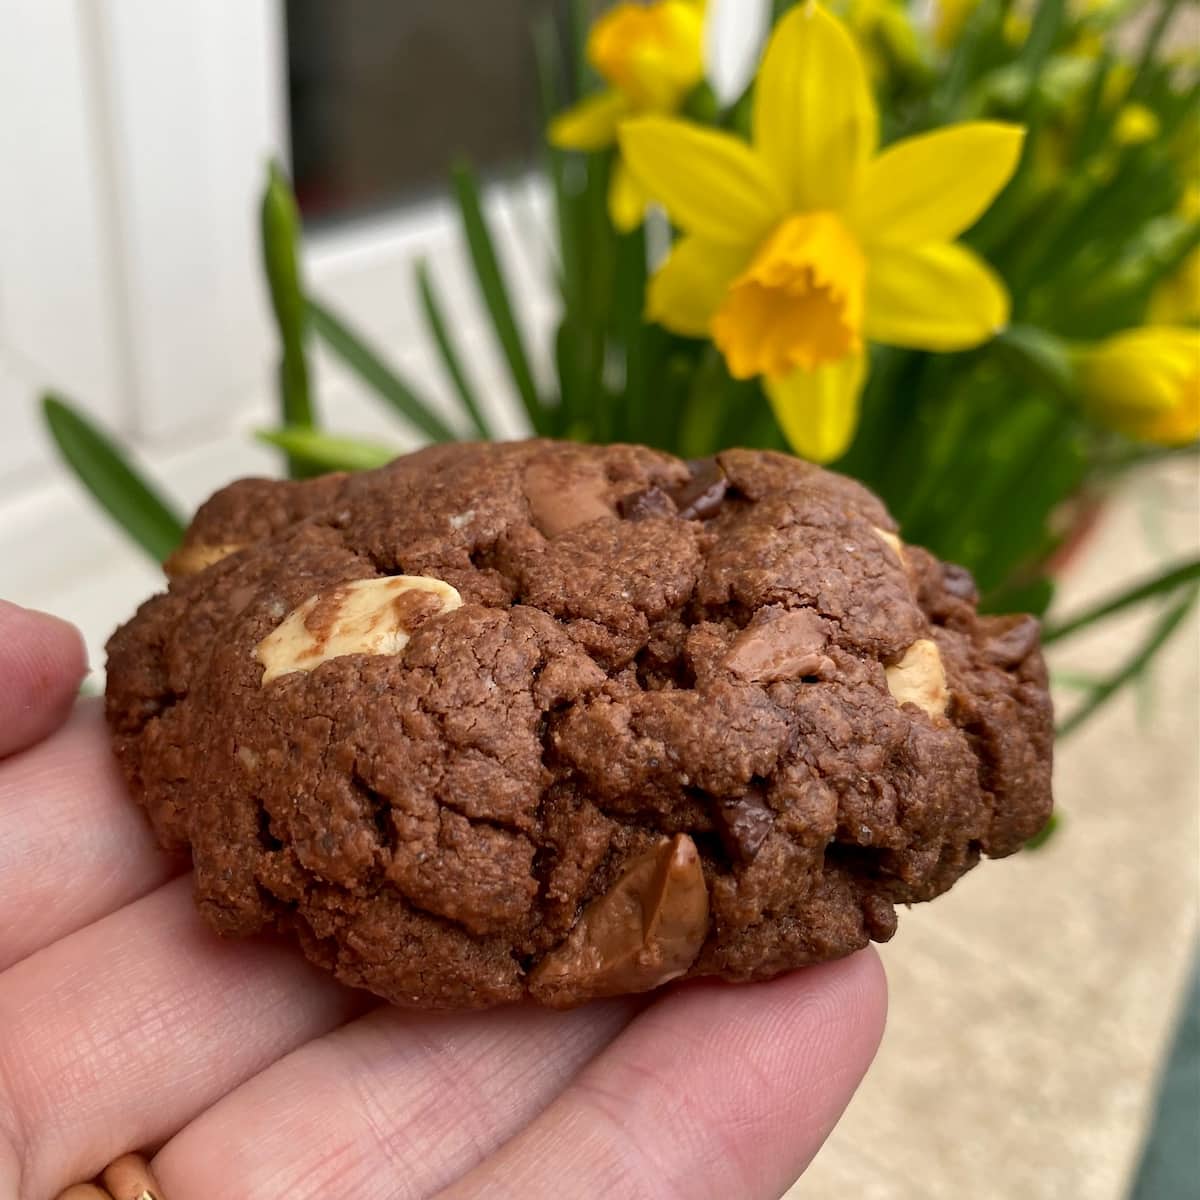 a chocolate brownie cookie next to daffodils